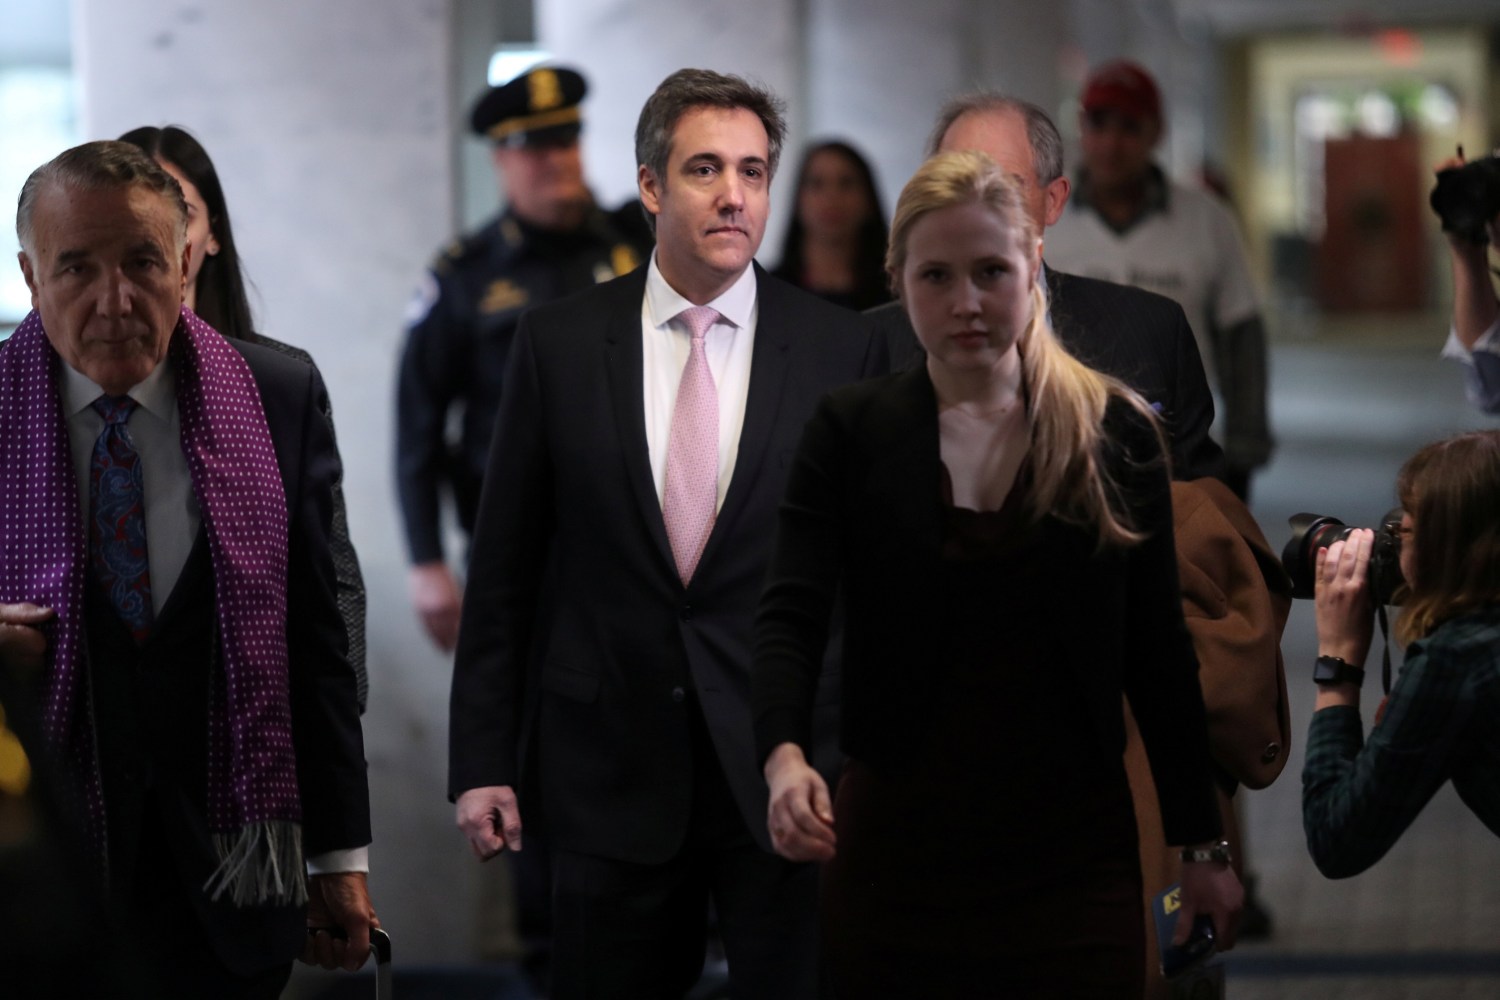 Former Trump personal attorney Michael Cohen arrives to testify behind closed doors before the Senate Intelligence Committee inside the Senate Hart Office Building on Capitol Hill in Washington, U.S., February 26, 2019. REUTERS/Jonathan Ernst - RC15AA862130